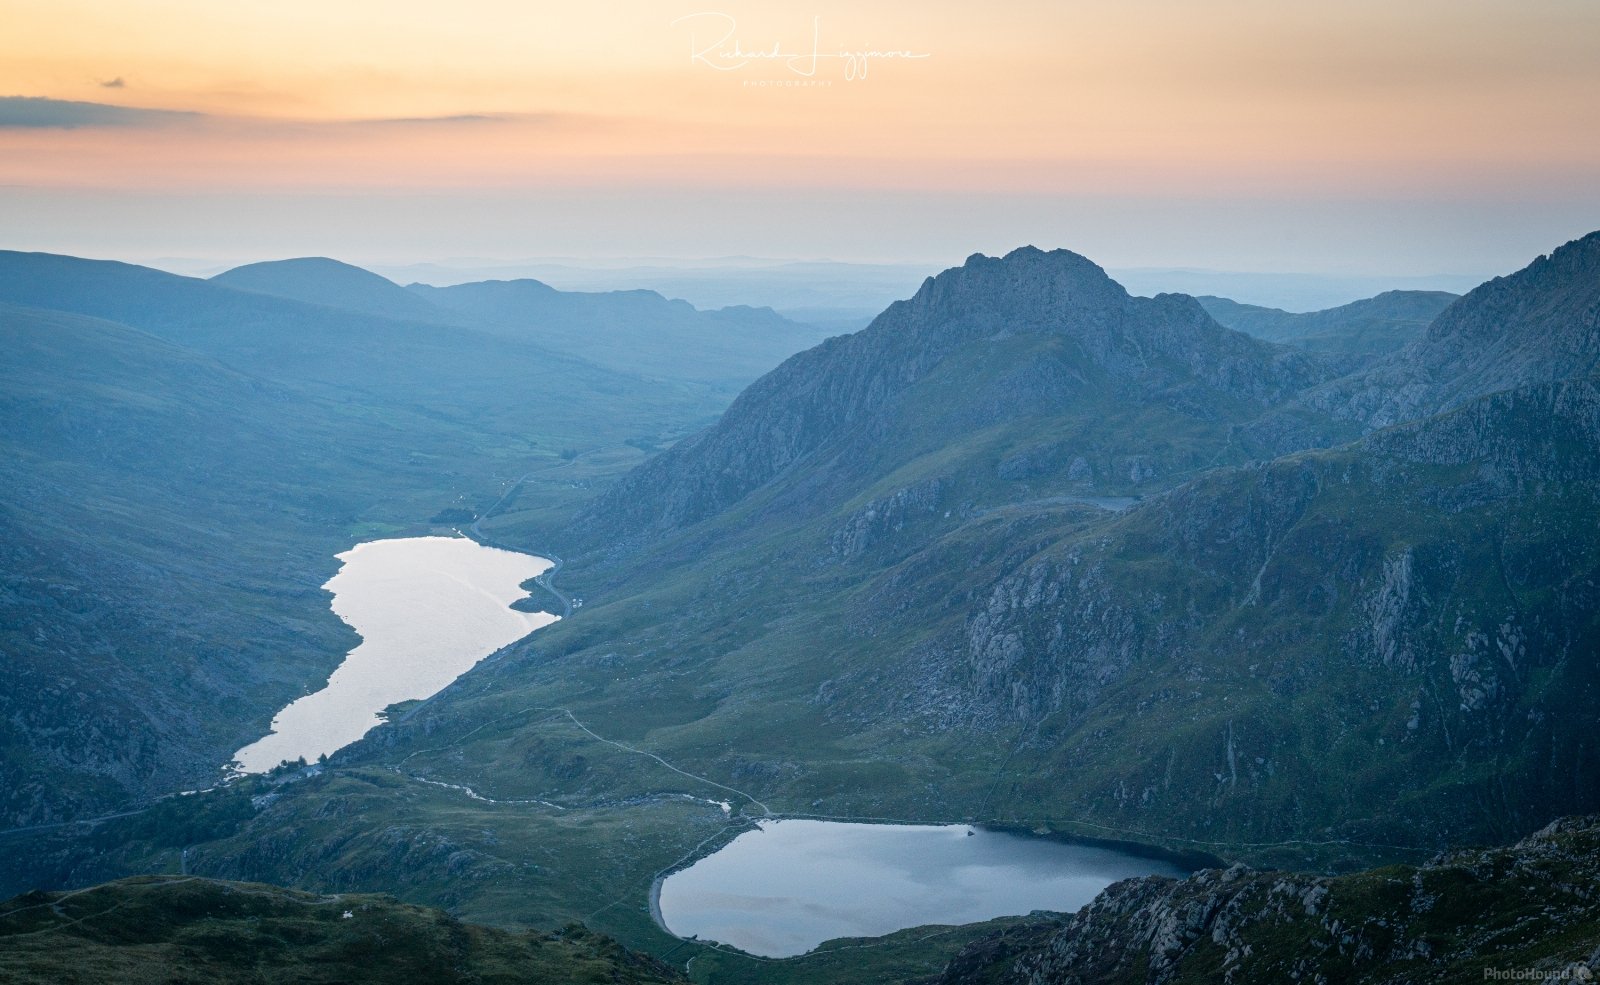 Image of Y Garn by Richard Lizzimore